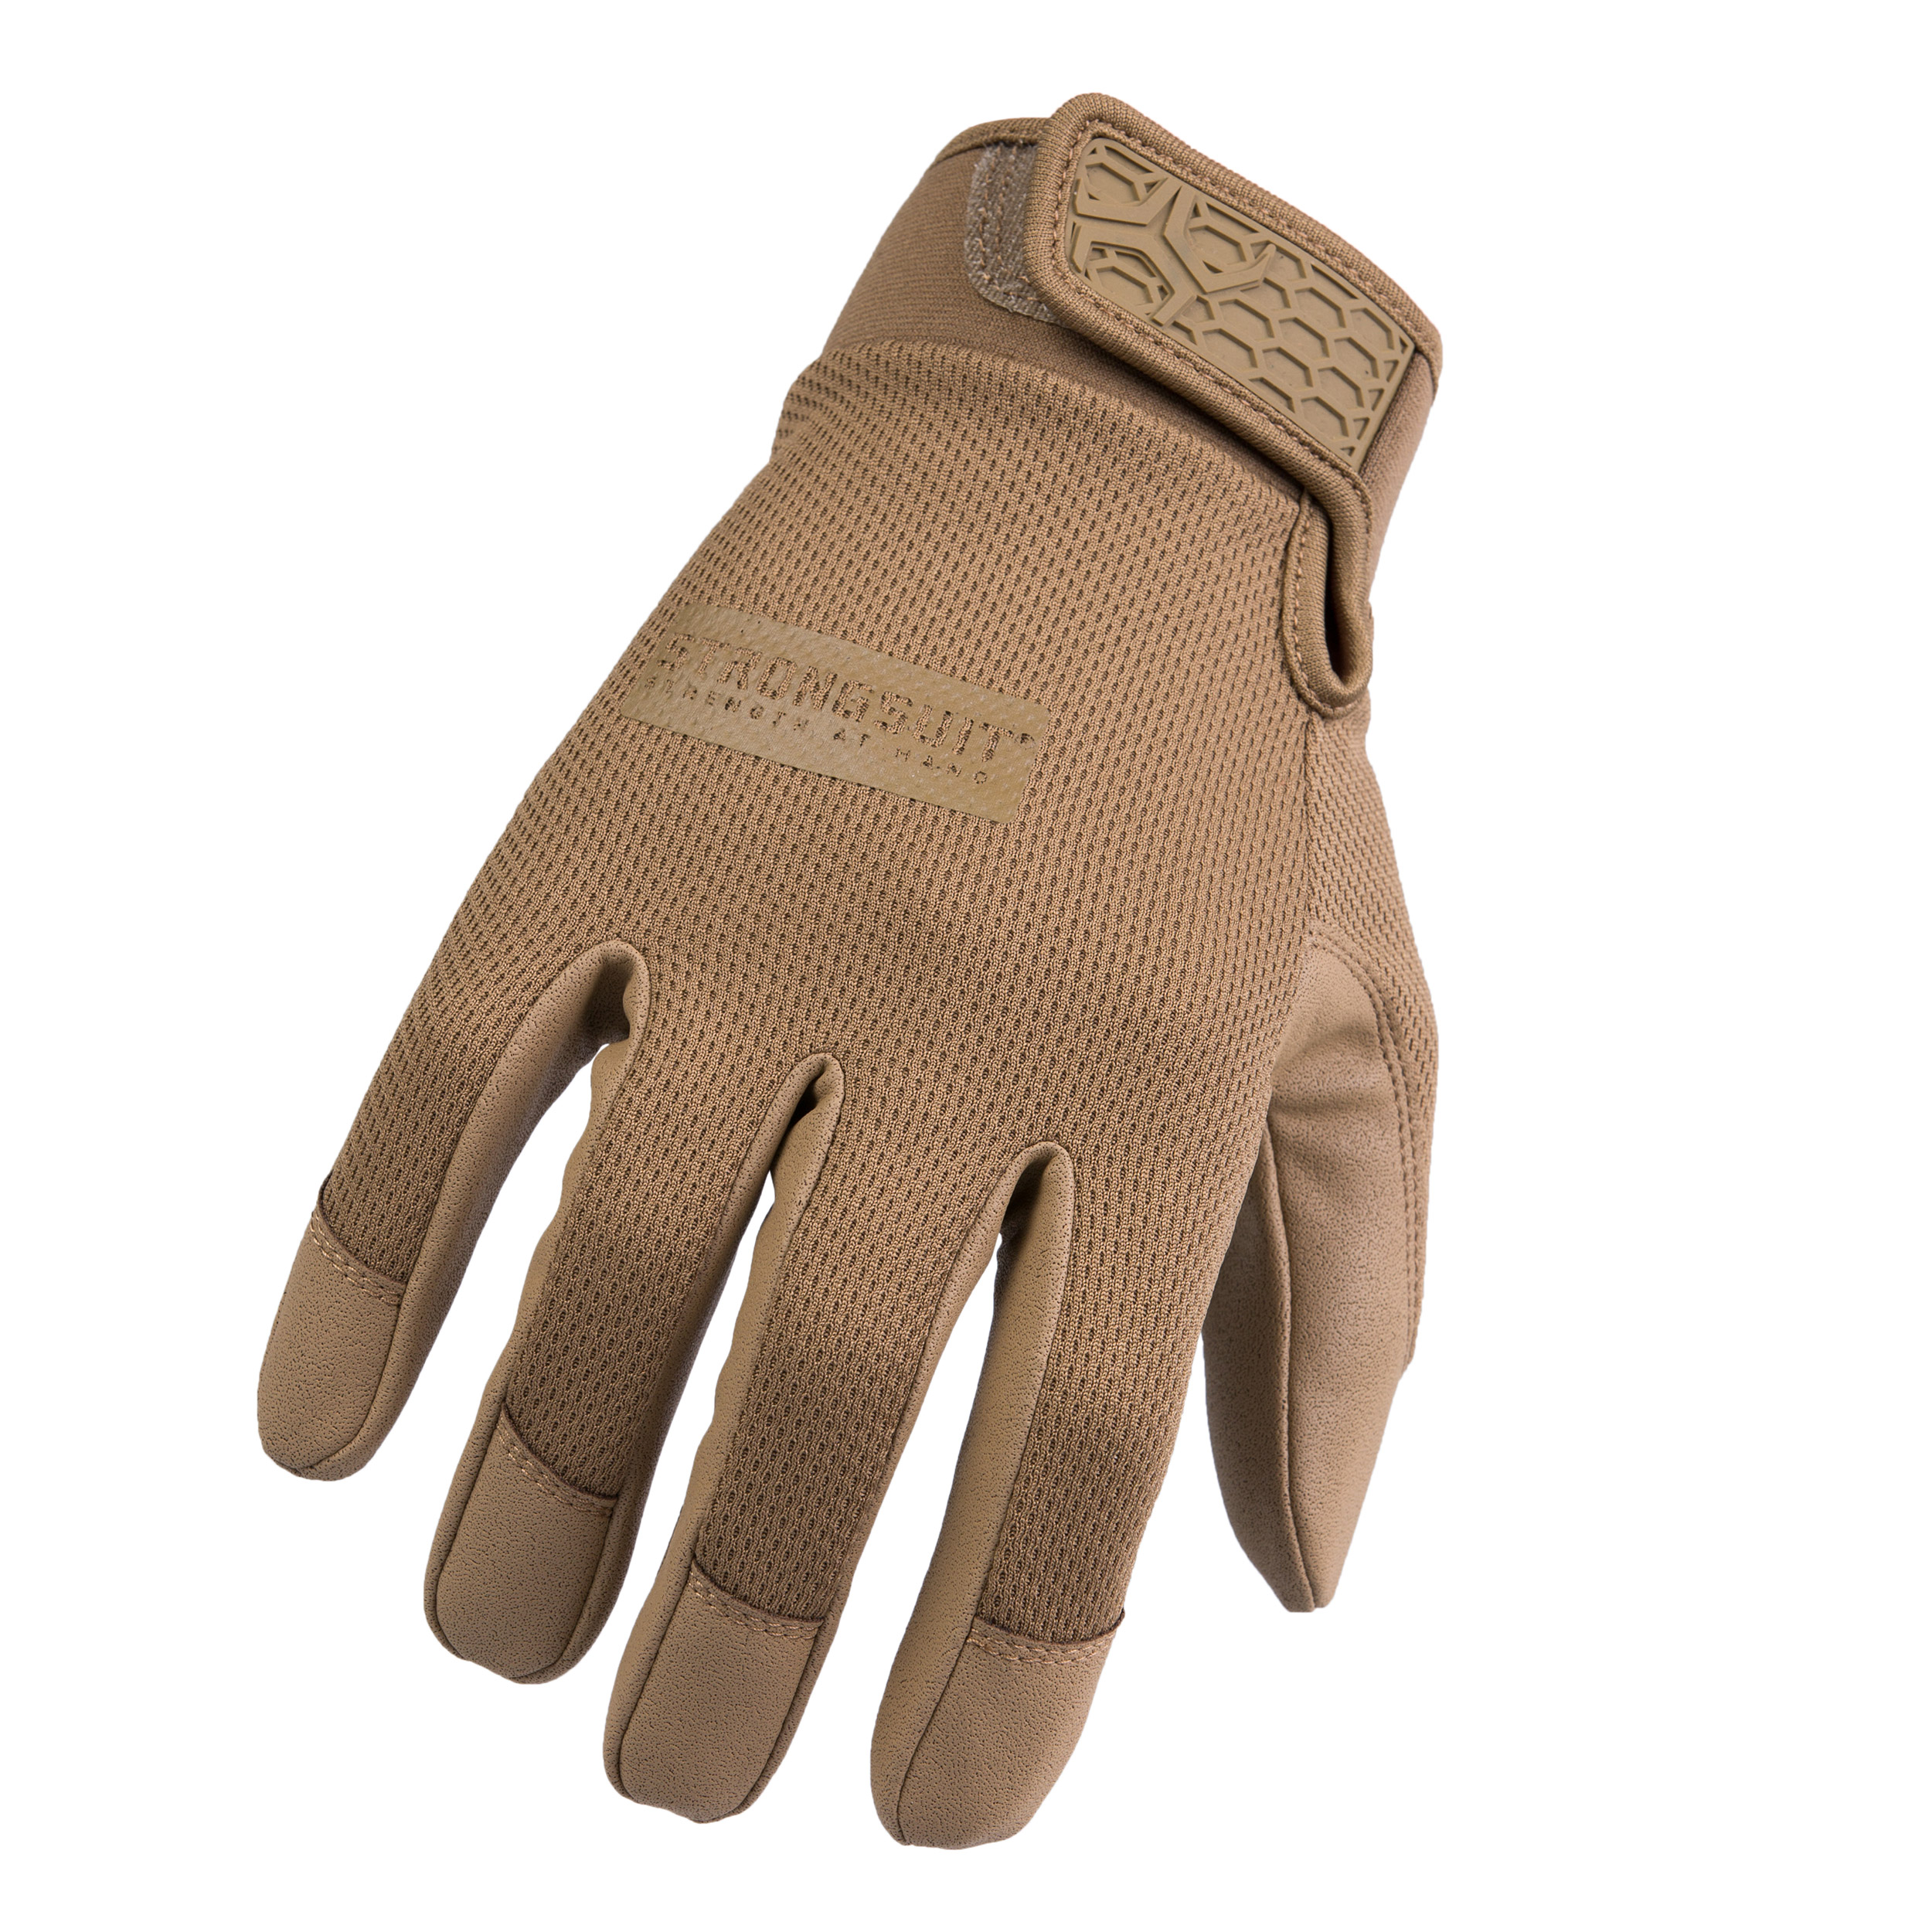 Second Skin Gloves Coyote Gloves Extra Large